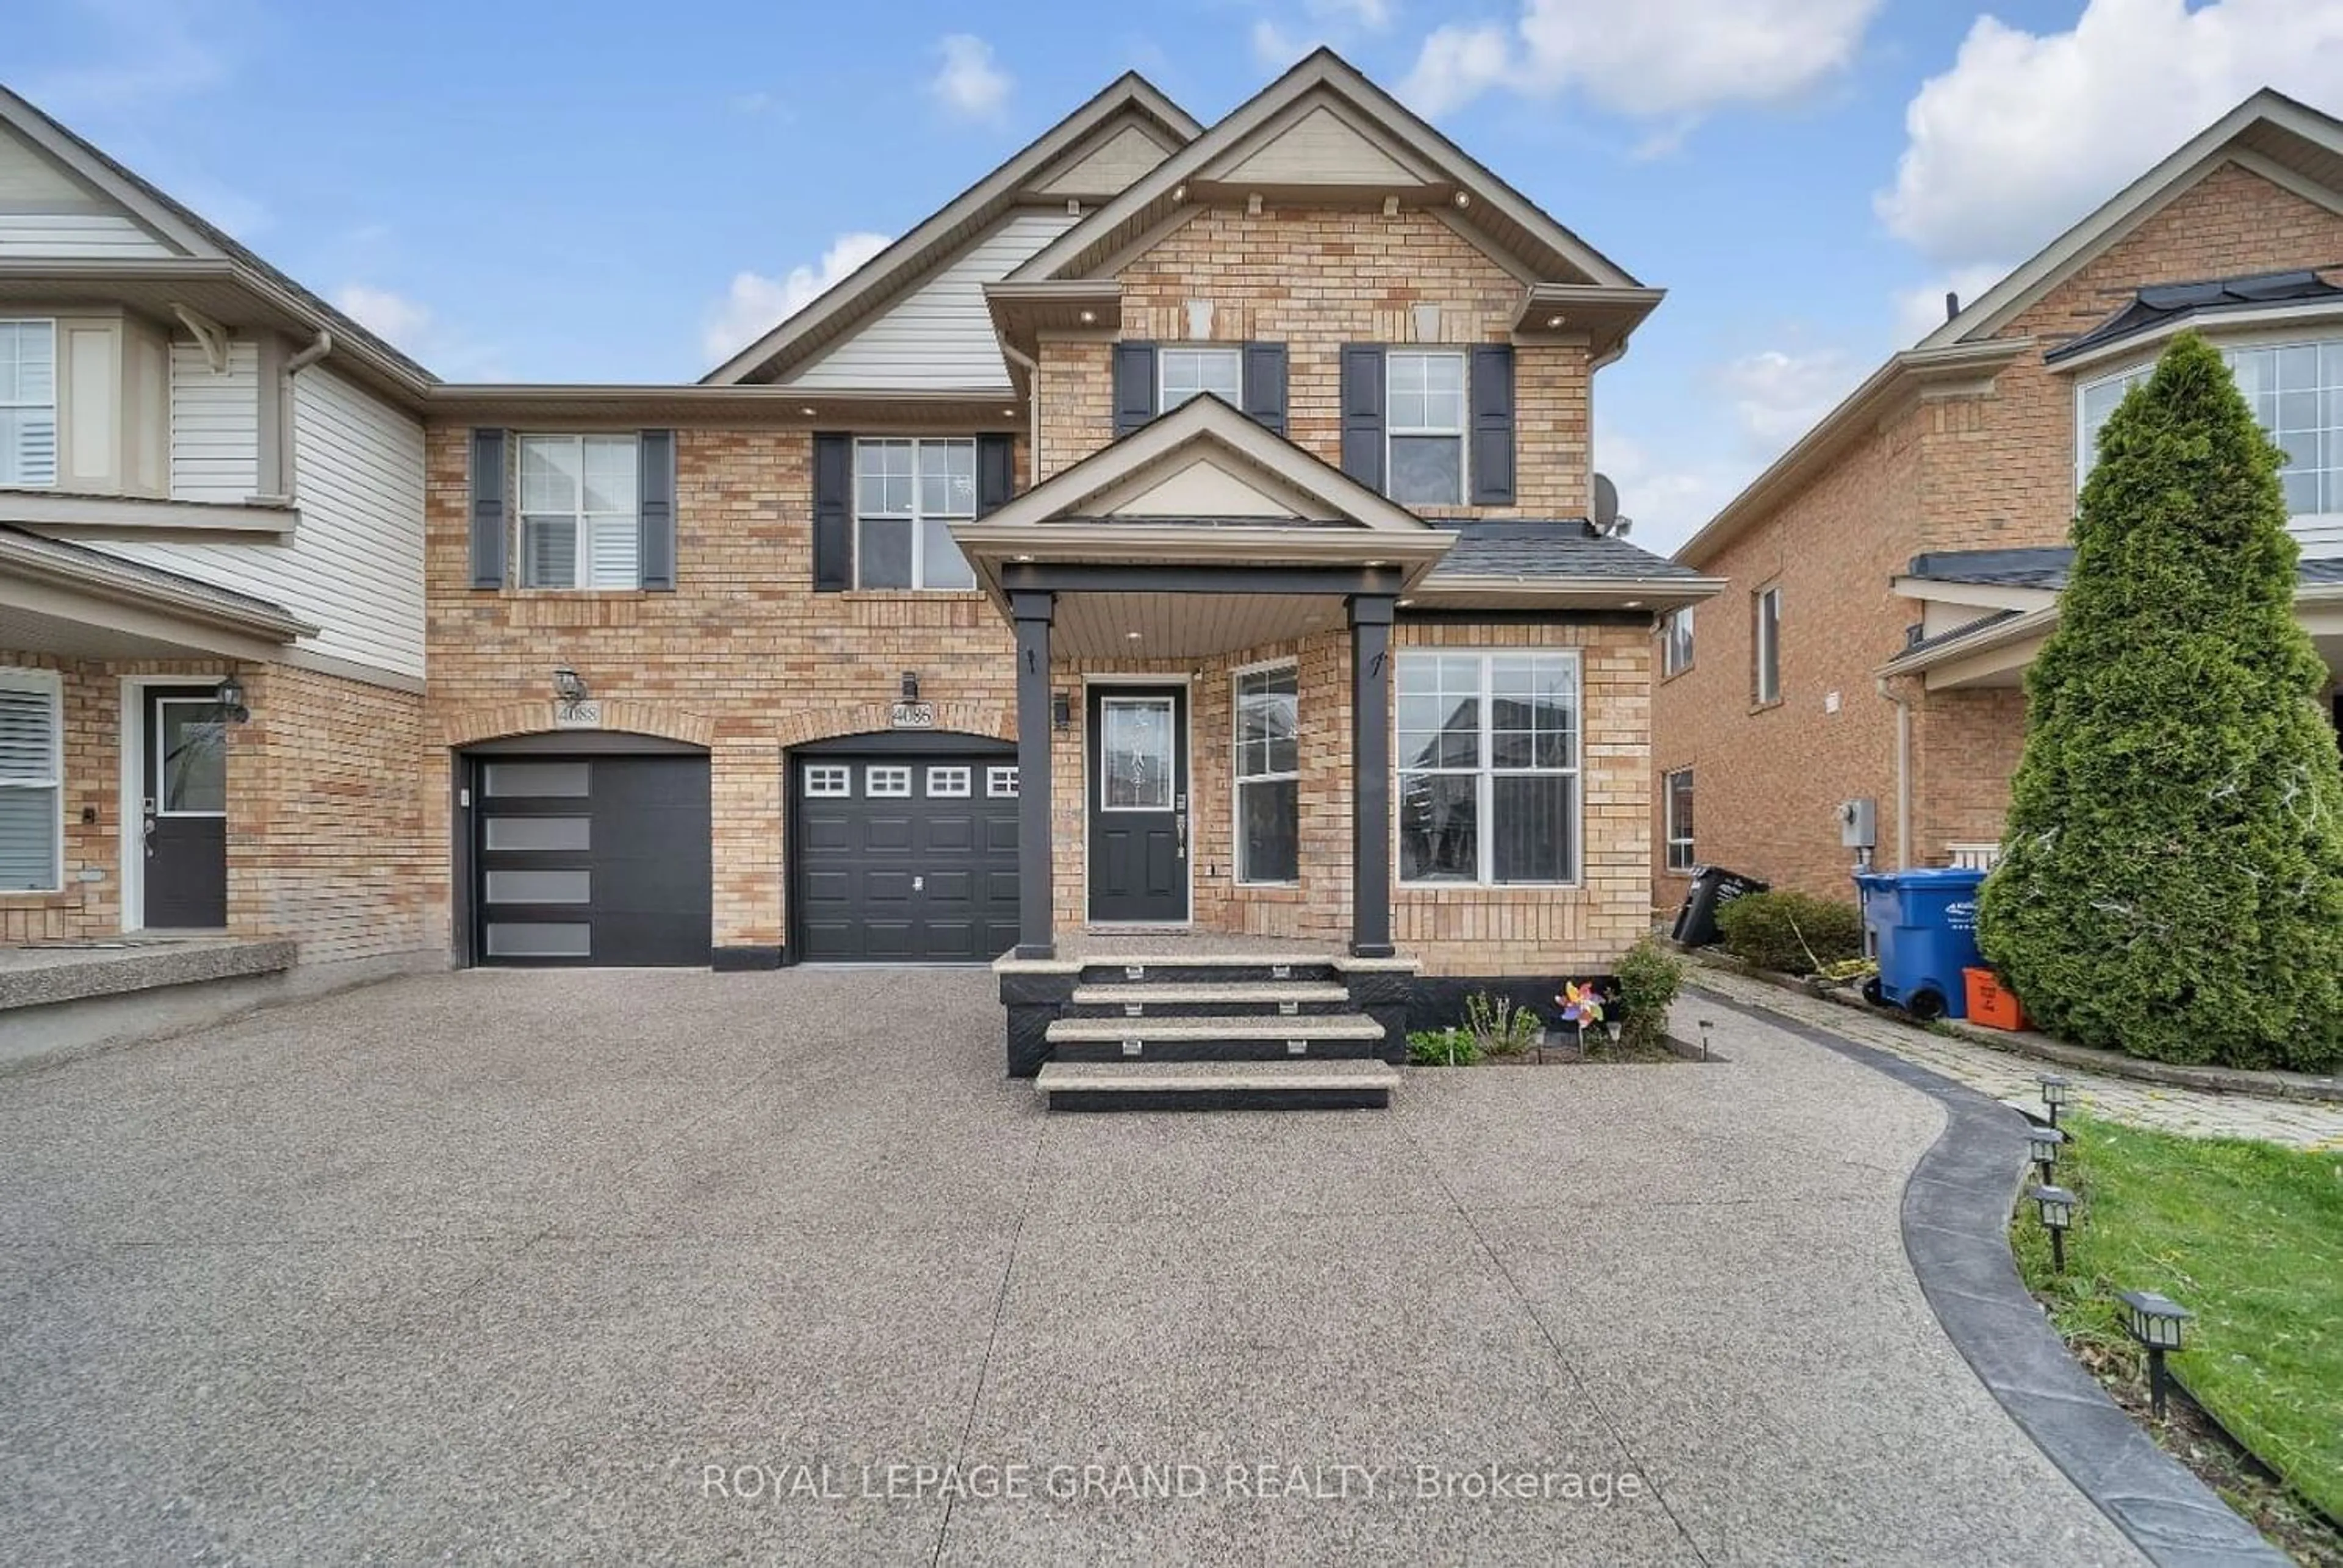 Home with brick exterior material for 4086 Donnic Dr, Burlington Ontario L7M 0A5